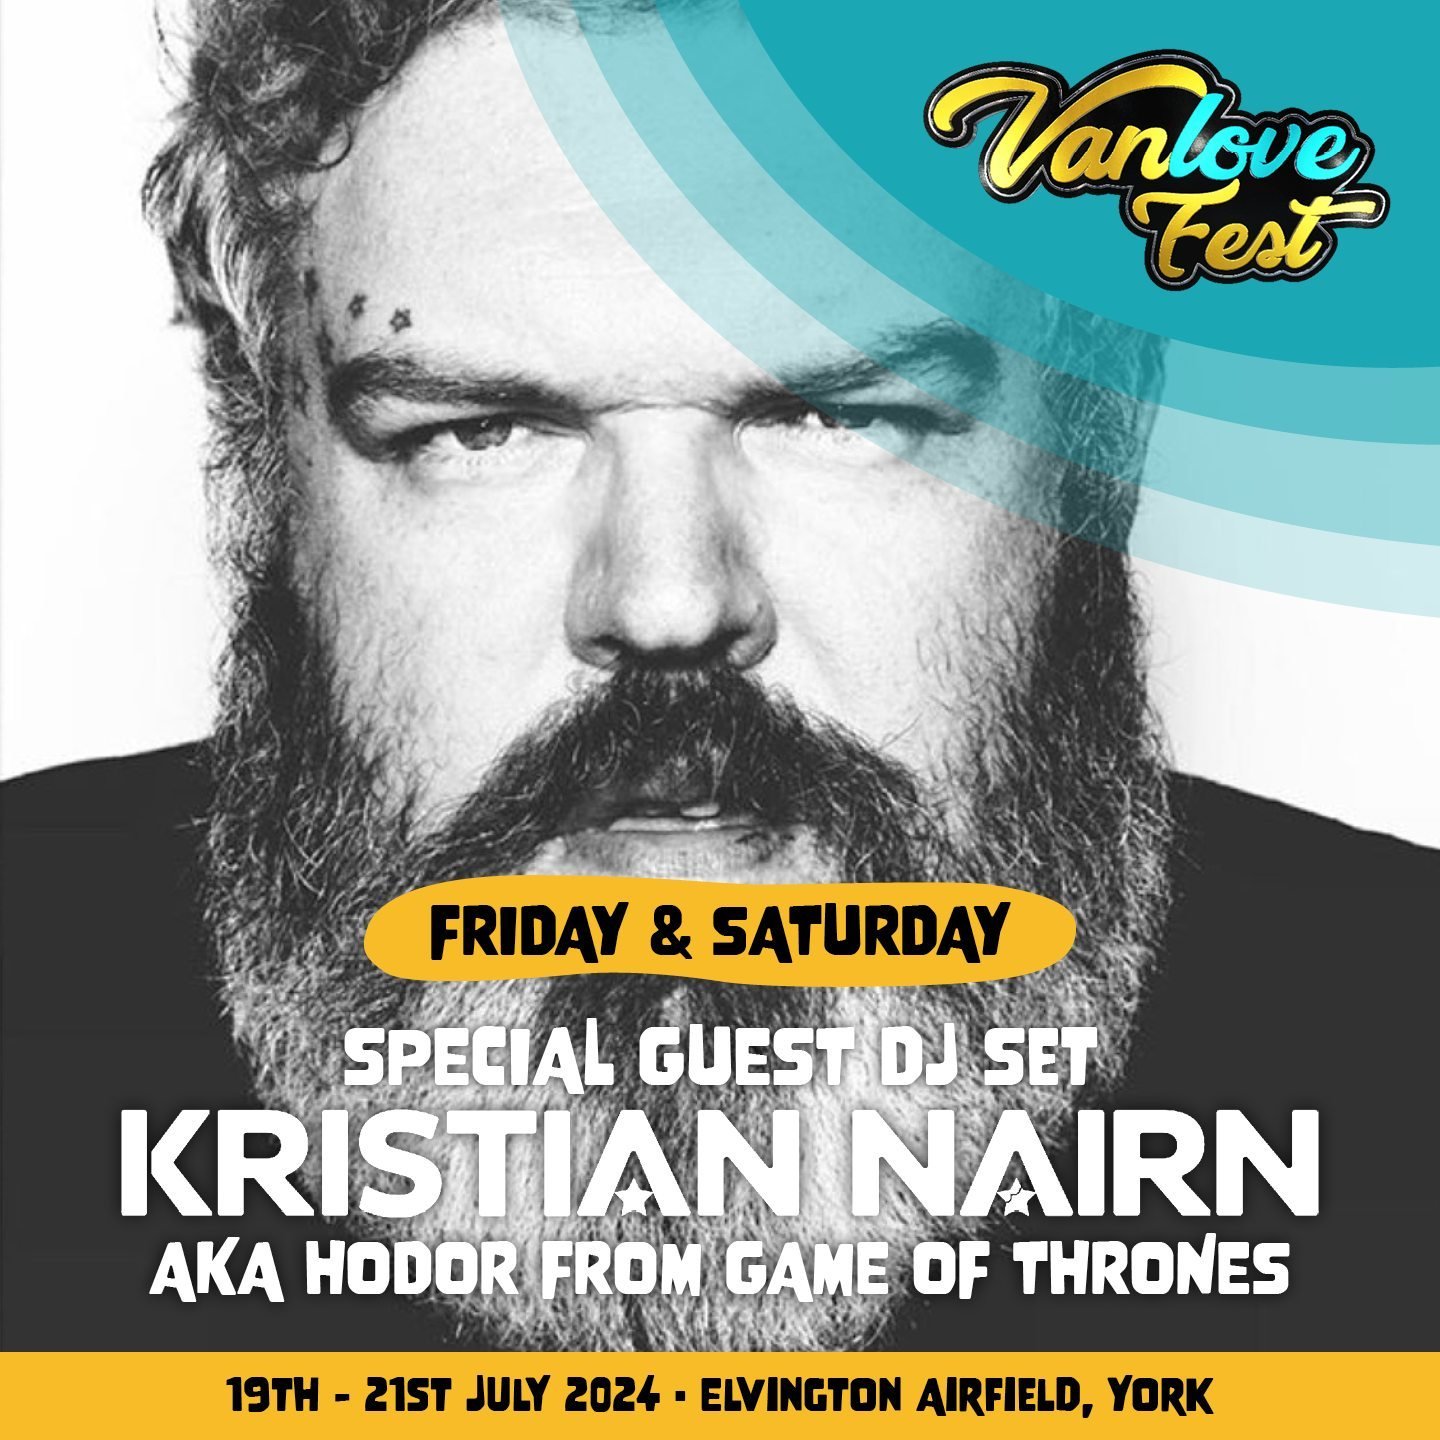 Yep, you heard right!

@Kristiannairn famously known and adored as Hodor in Game Of Thrones, has just joined our AWESOME lineup for Vanlove Fest 2024! 

He&rsquo;ll be joining us for not one but TWO nights, with an energy-pumped set on Friday night t